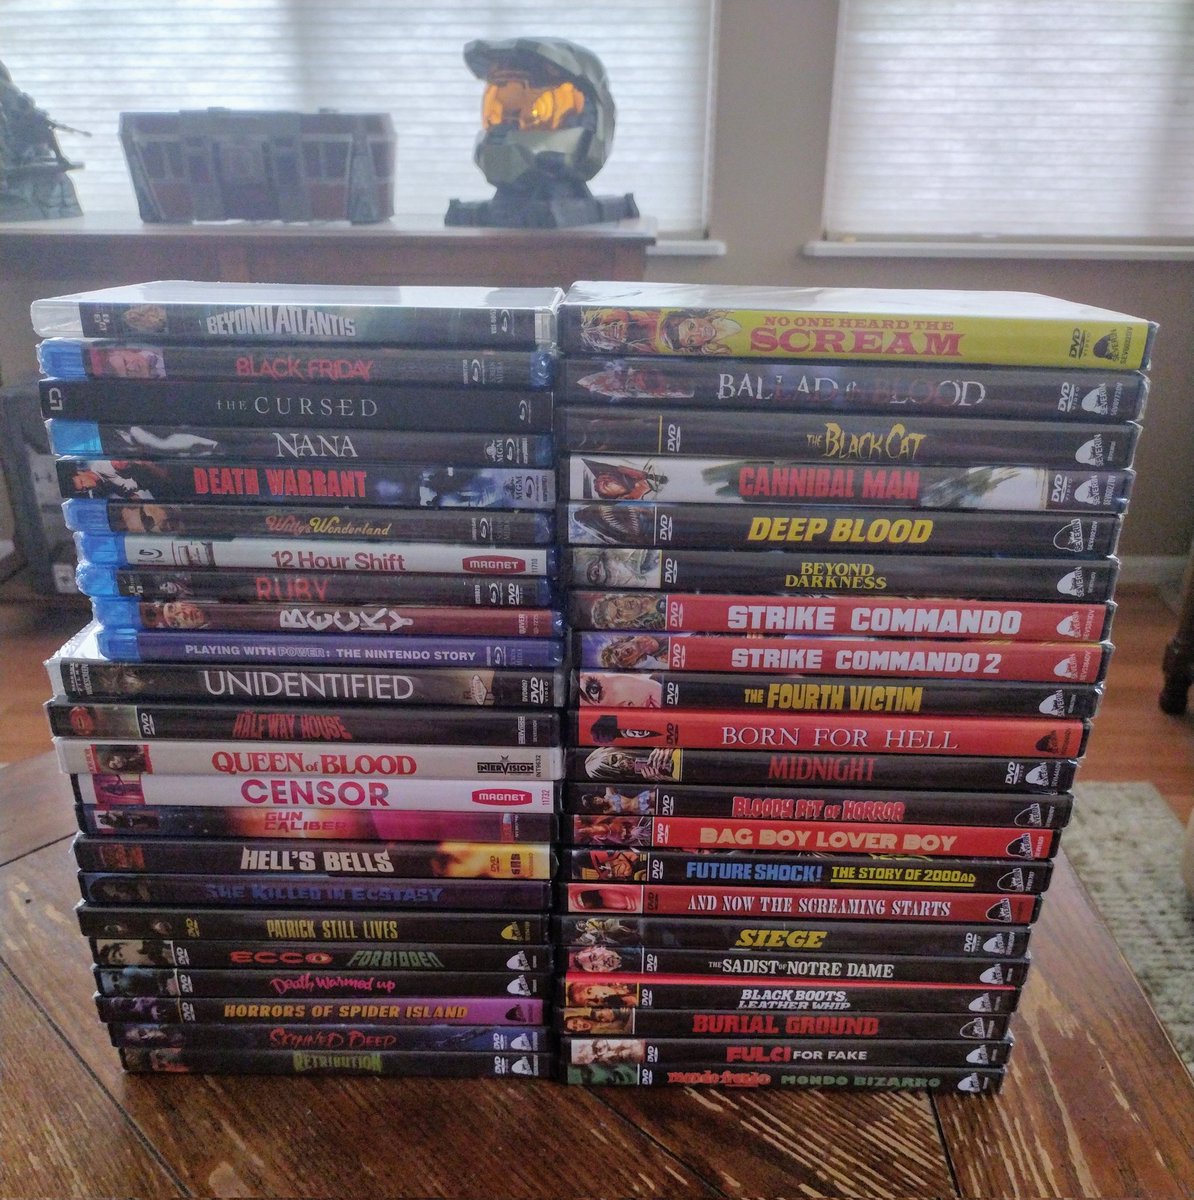 Huge haul from @MediaatHB arrived today. Couldn't resist a bunch of @SeverinFilms DVDs for $6 and finally added Black Friday to the @GroovyBruce collection.

#PhysicalMedia #DVD #BluRay #Severin #HamiltonBook #FilmTwitter #Bmovie #HorrorCommunity #HorrorFamily #horror